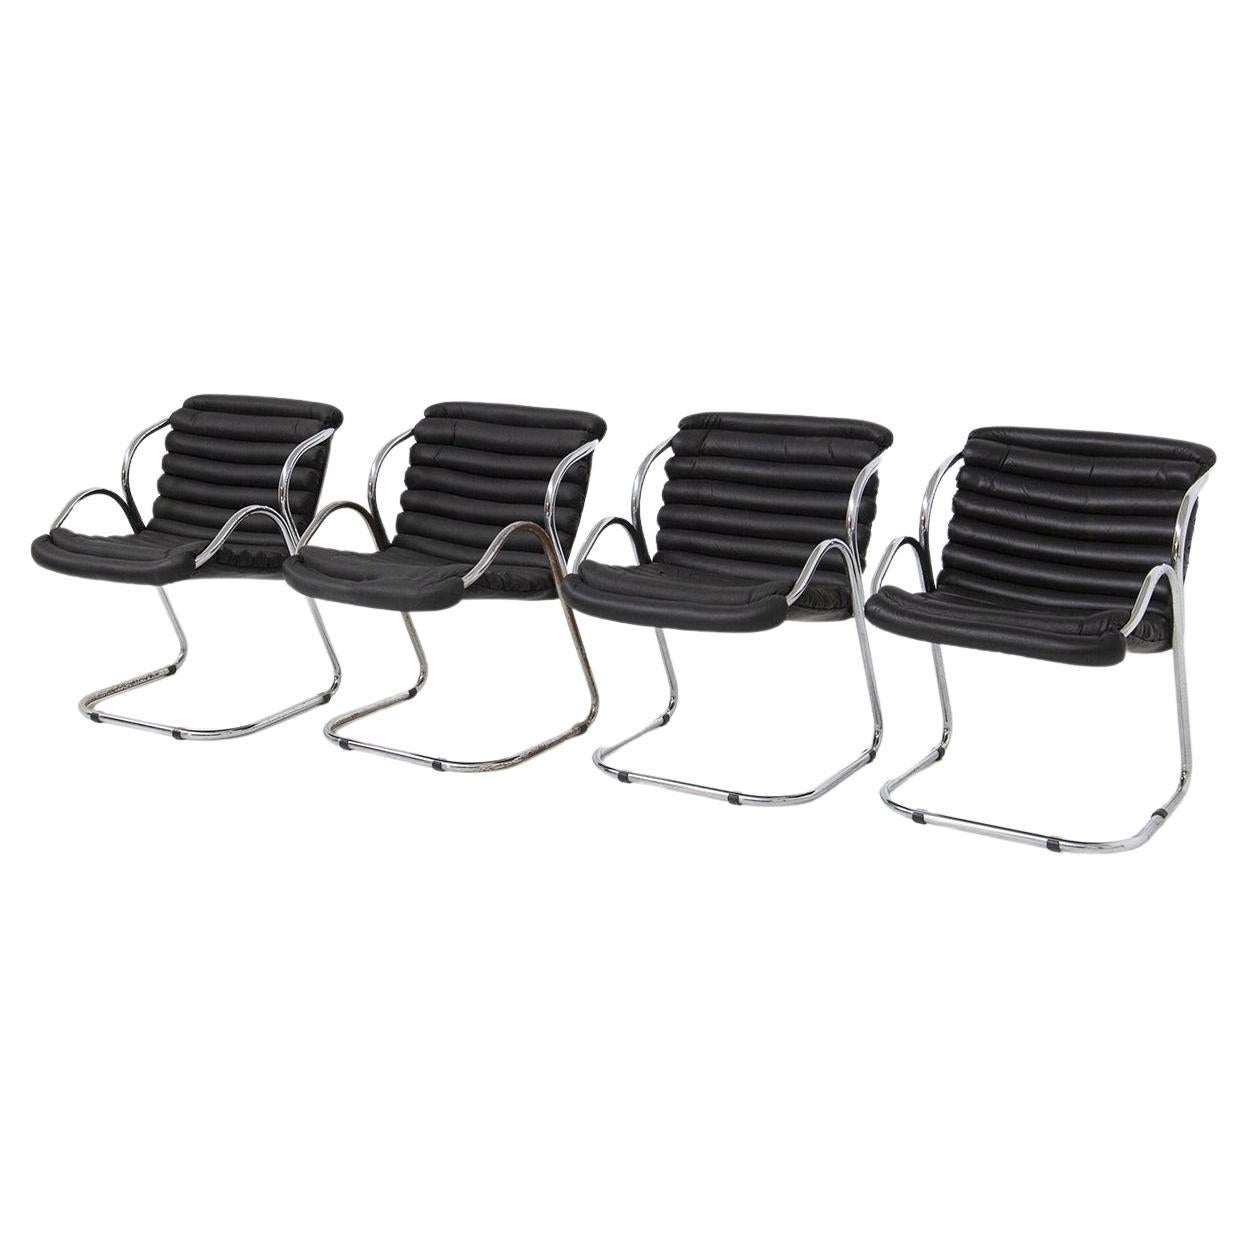 Whimsical Mid-Century Chairs in Black Leather